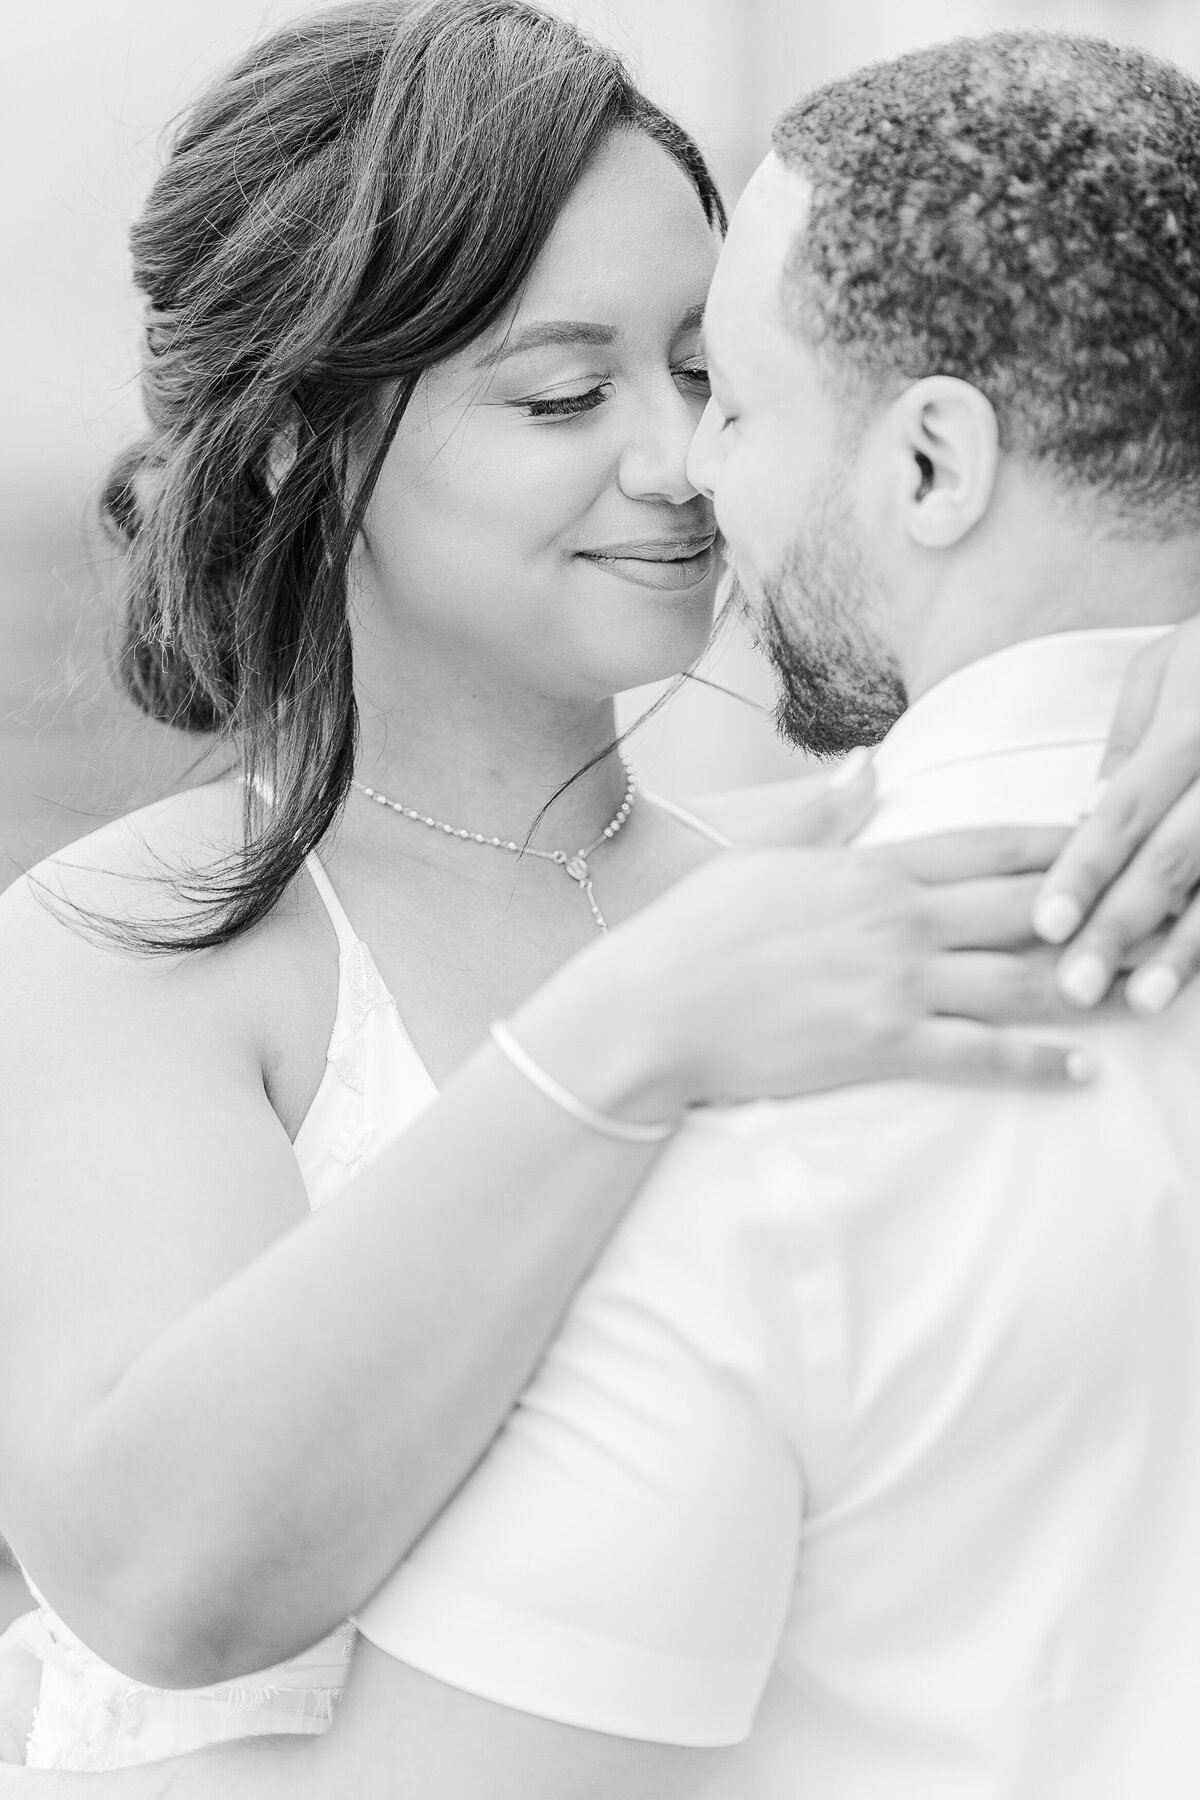 Close Up Image. Man and woman  share an embrace at their Crane Estate Wedding in Ipswich, MA. The image features the woman's face and the grooms's side profile. Their noses are touching and about to kiss. Captured by MA wedding photographer Lia Rose Weddings.